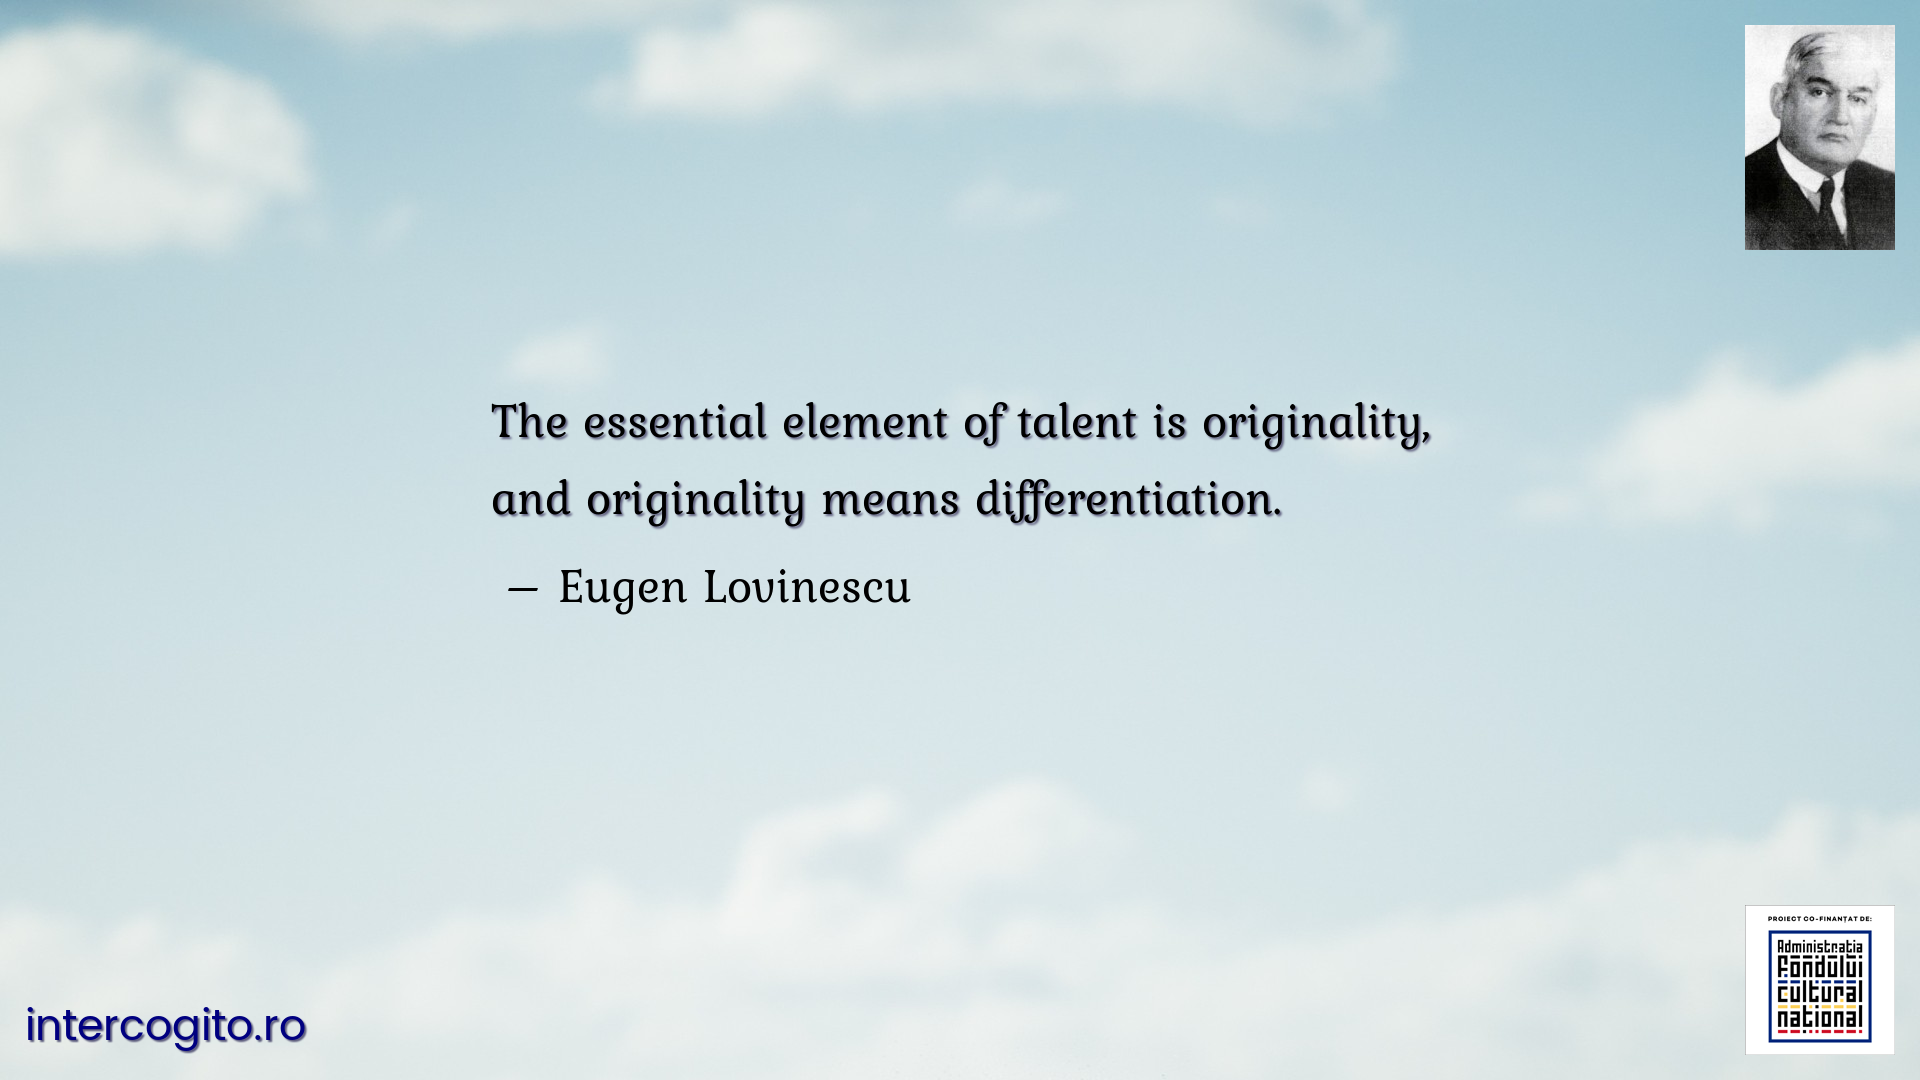 The essential element of talent is originality, and originality means differentiation.